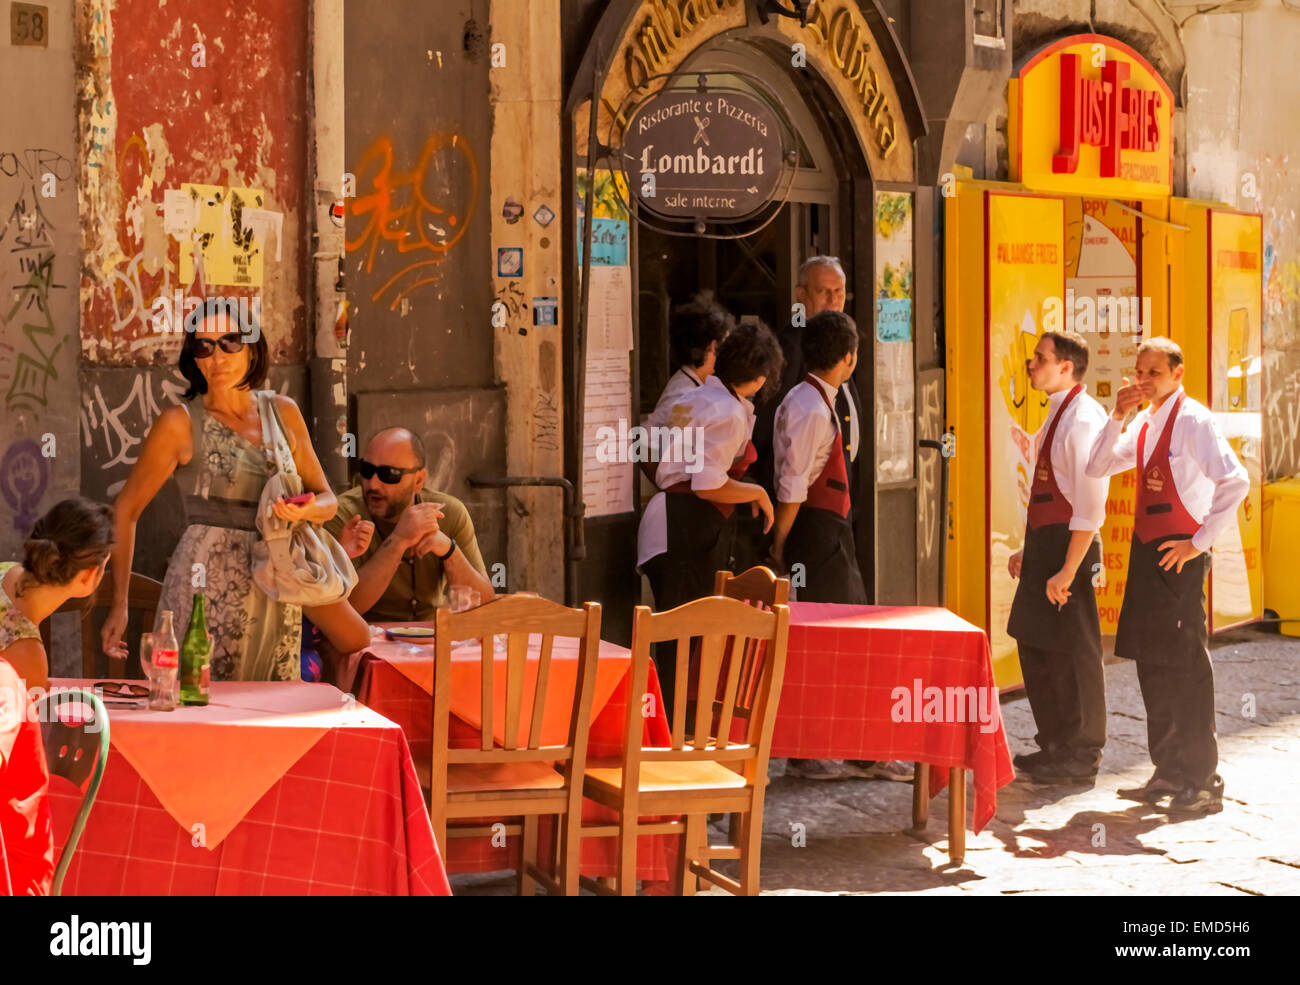 Waiters and customers / patrons outdoors at a Pizza restaurant in the old town area of Naples. Stock Photo